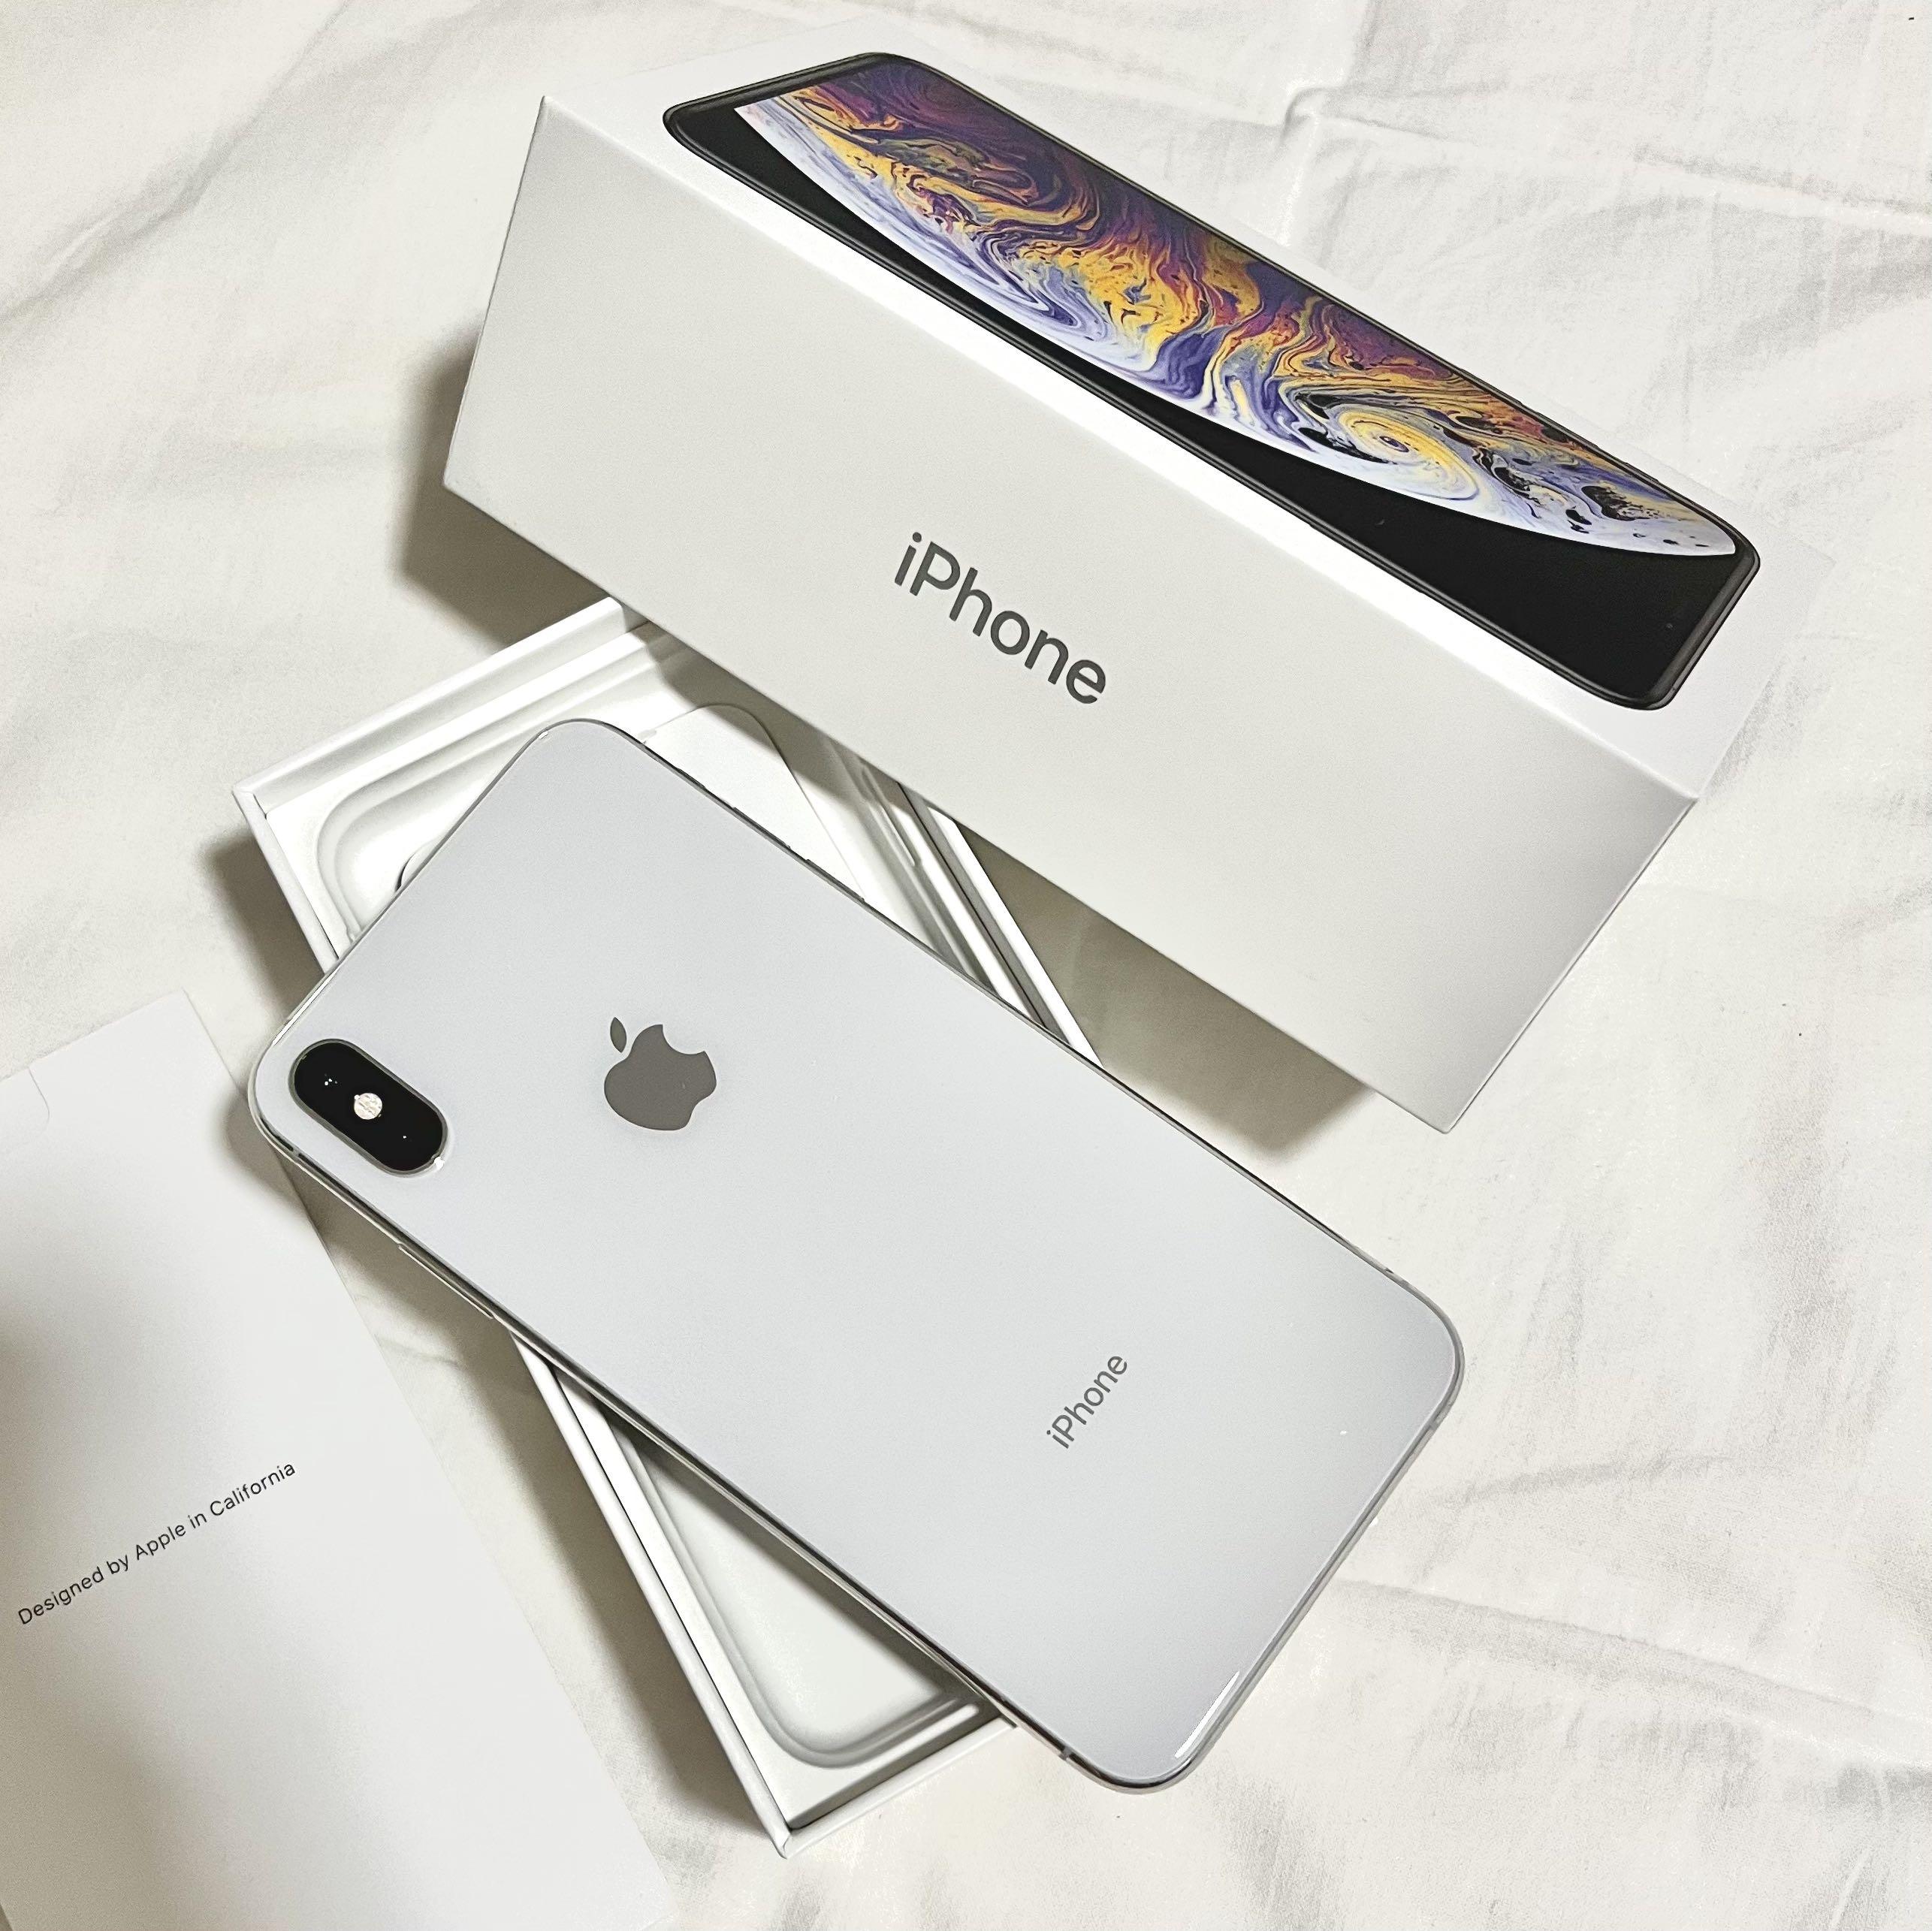 IPHONE XS MAX 64GB SILVER WHITE, Mobile Phones & Gadgets, Mobile